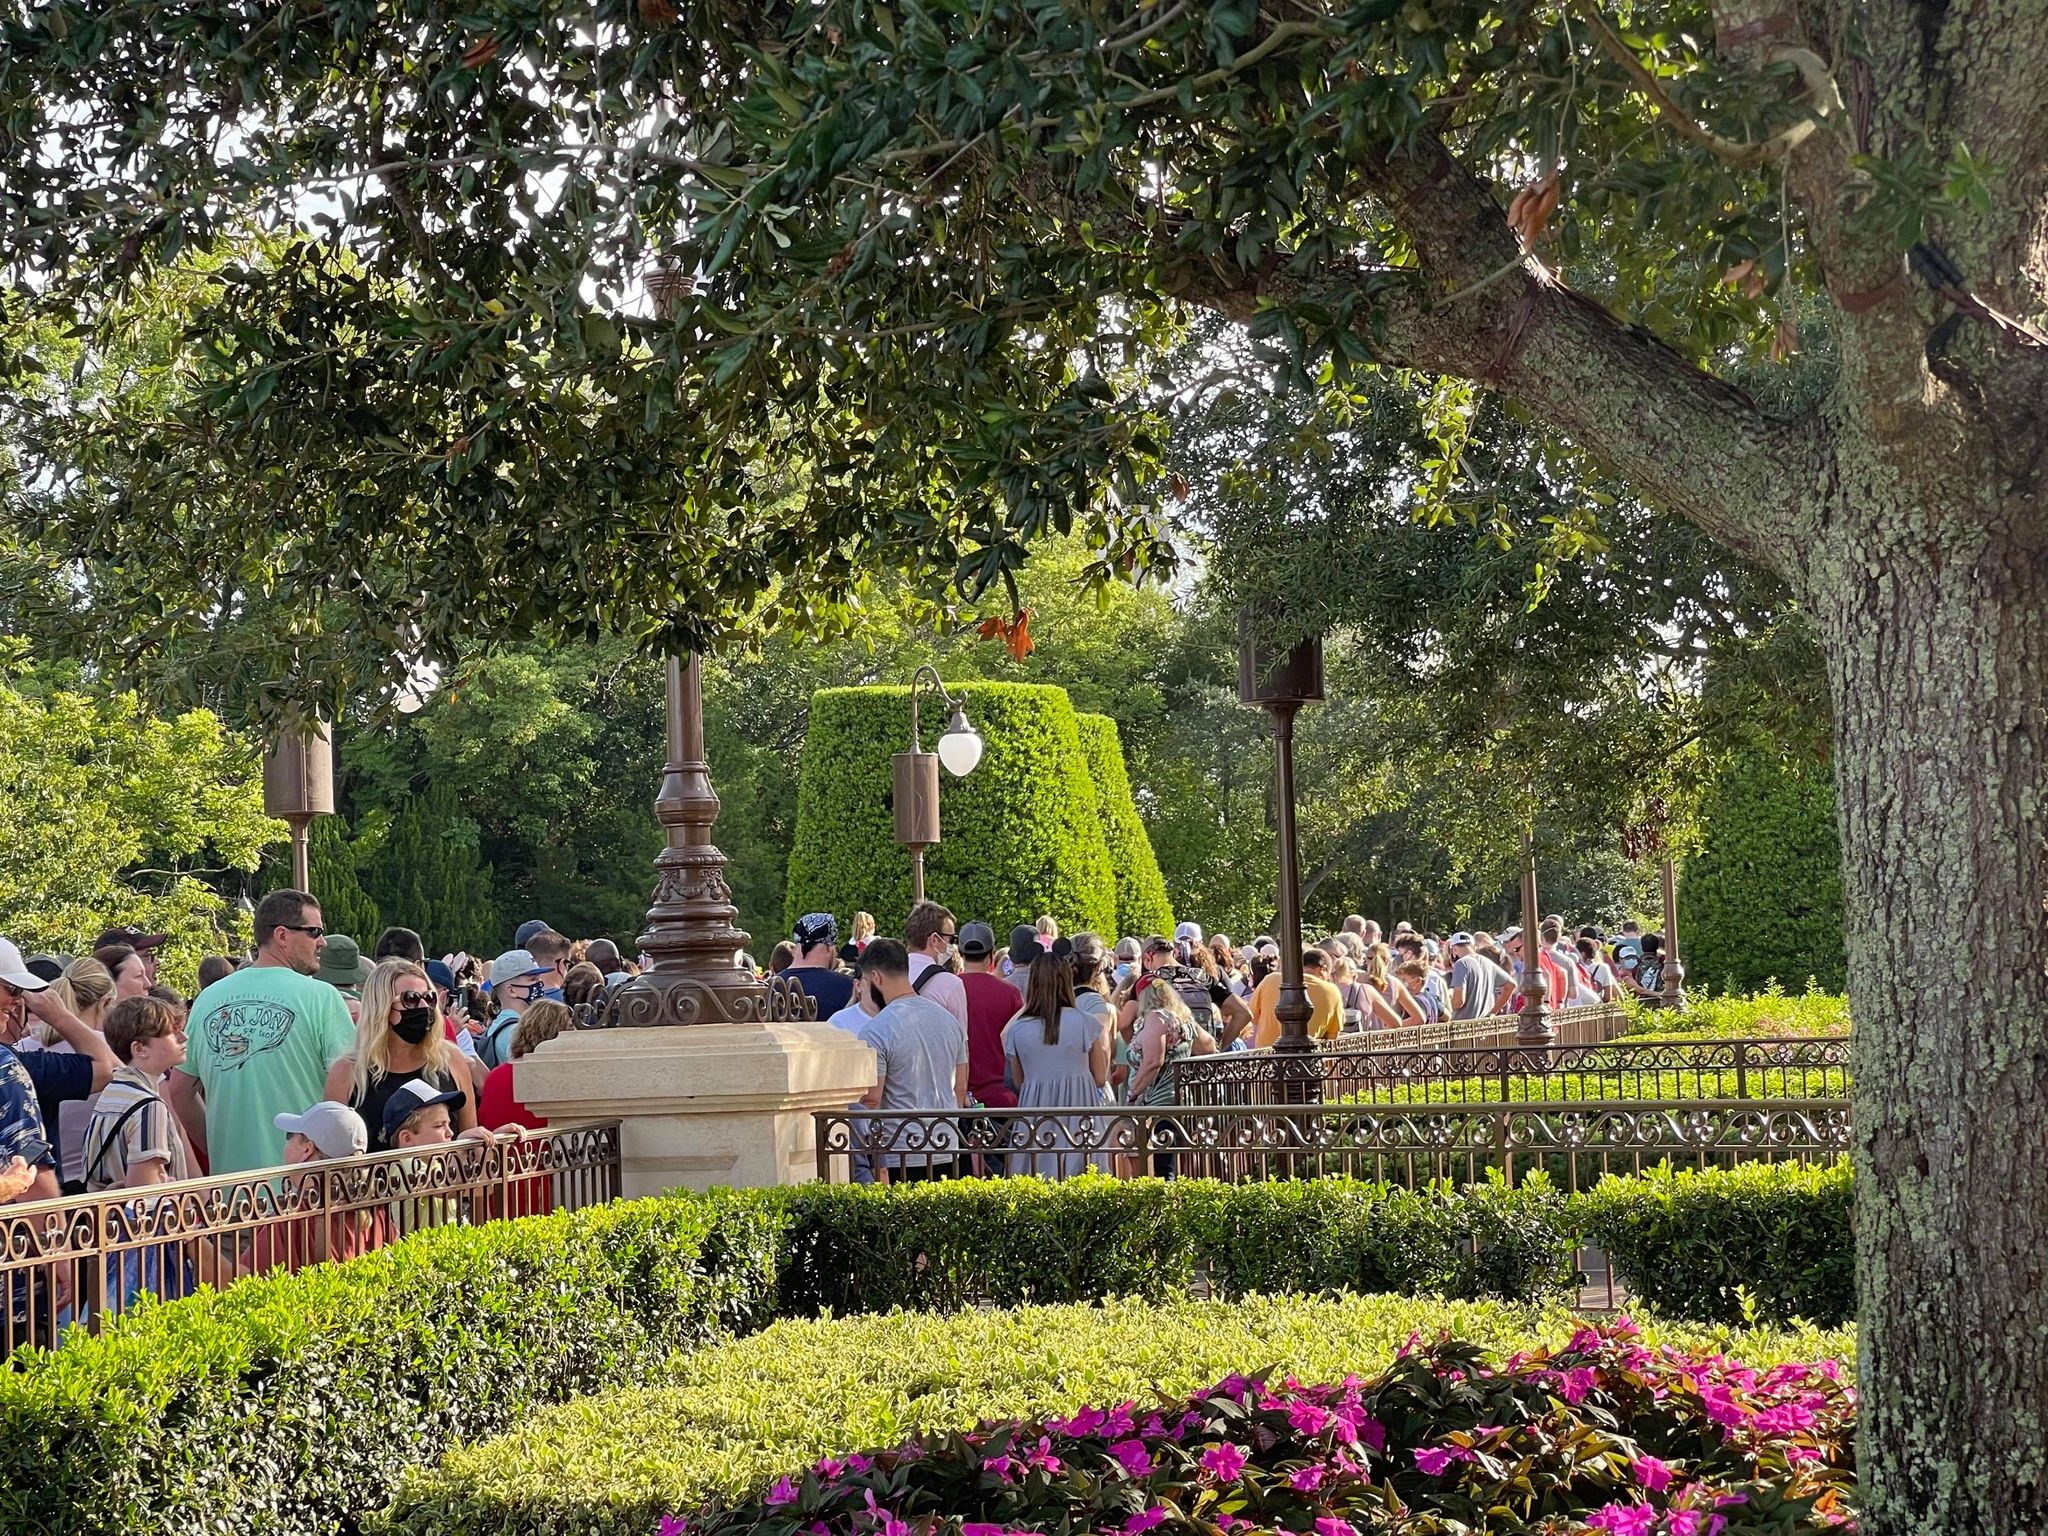 To Rope Drop or Not: That is the Spring Break Question - MickeyBlog.com